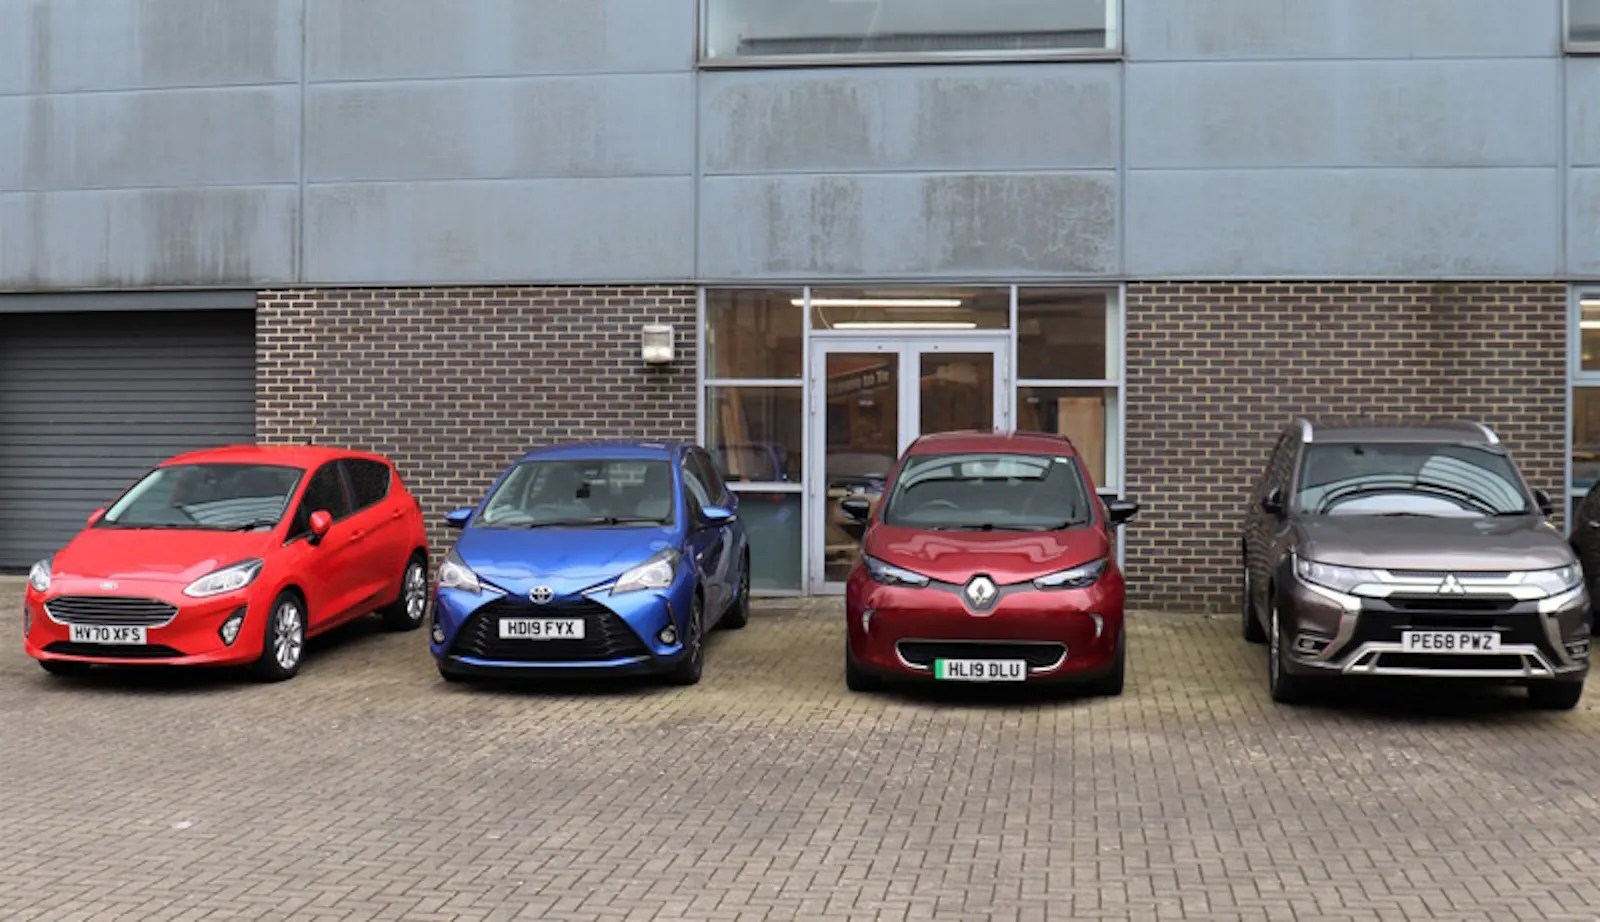 'Green skills' cars acquired by East Surrey College, Redhill